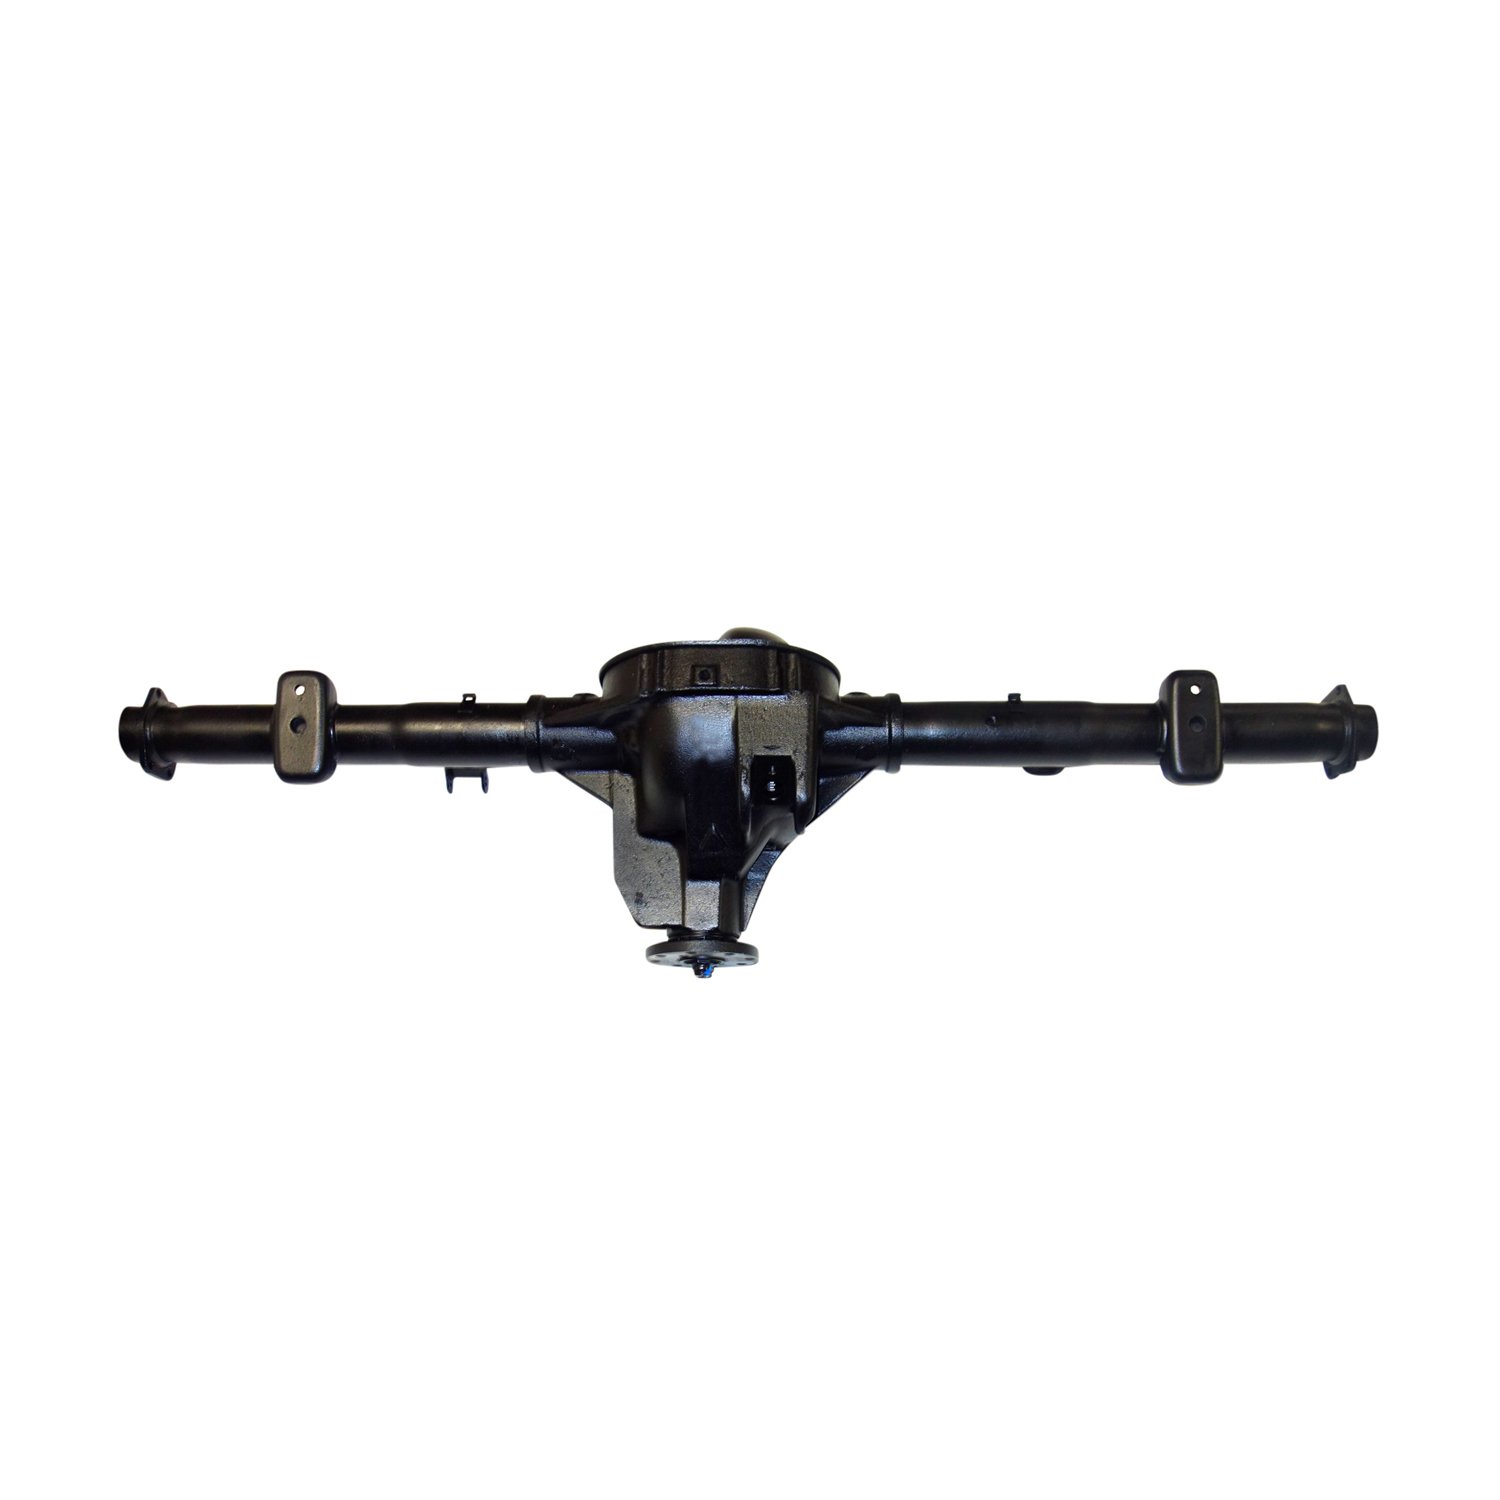 Remanufactured Axle Assy for 8.8" 91-94 & Mazda Explorer & Navajo 3.73 w/ ABS, Posi LSD